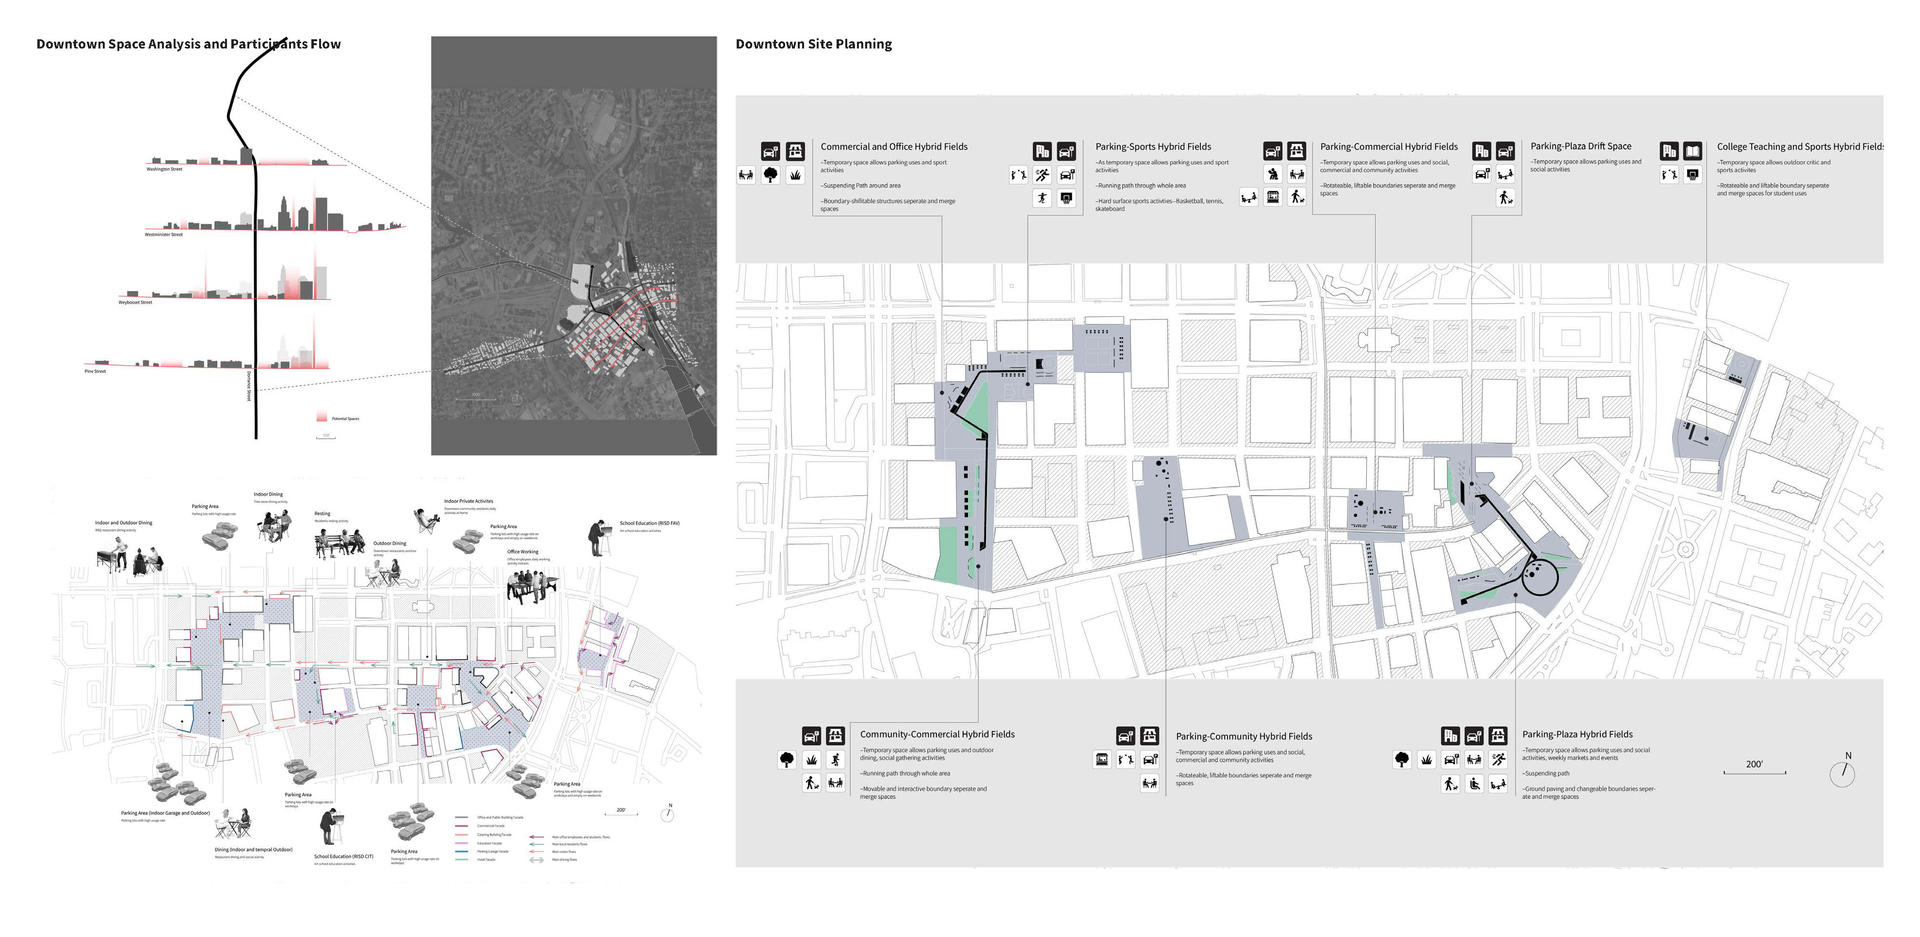 Downtown Space Analysis and Participants Flow, Site Planning